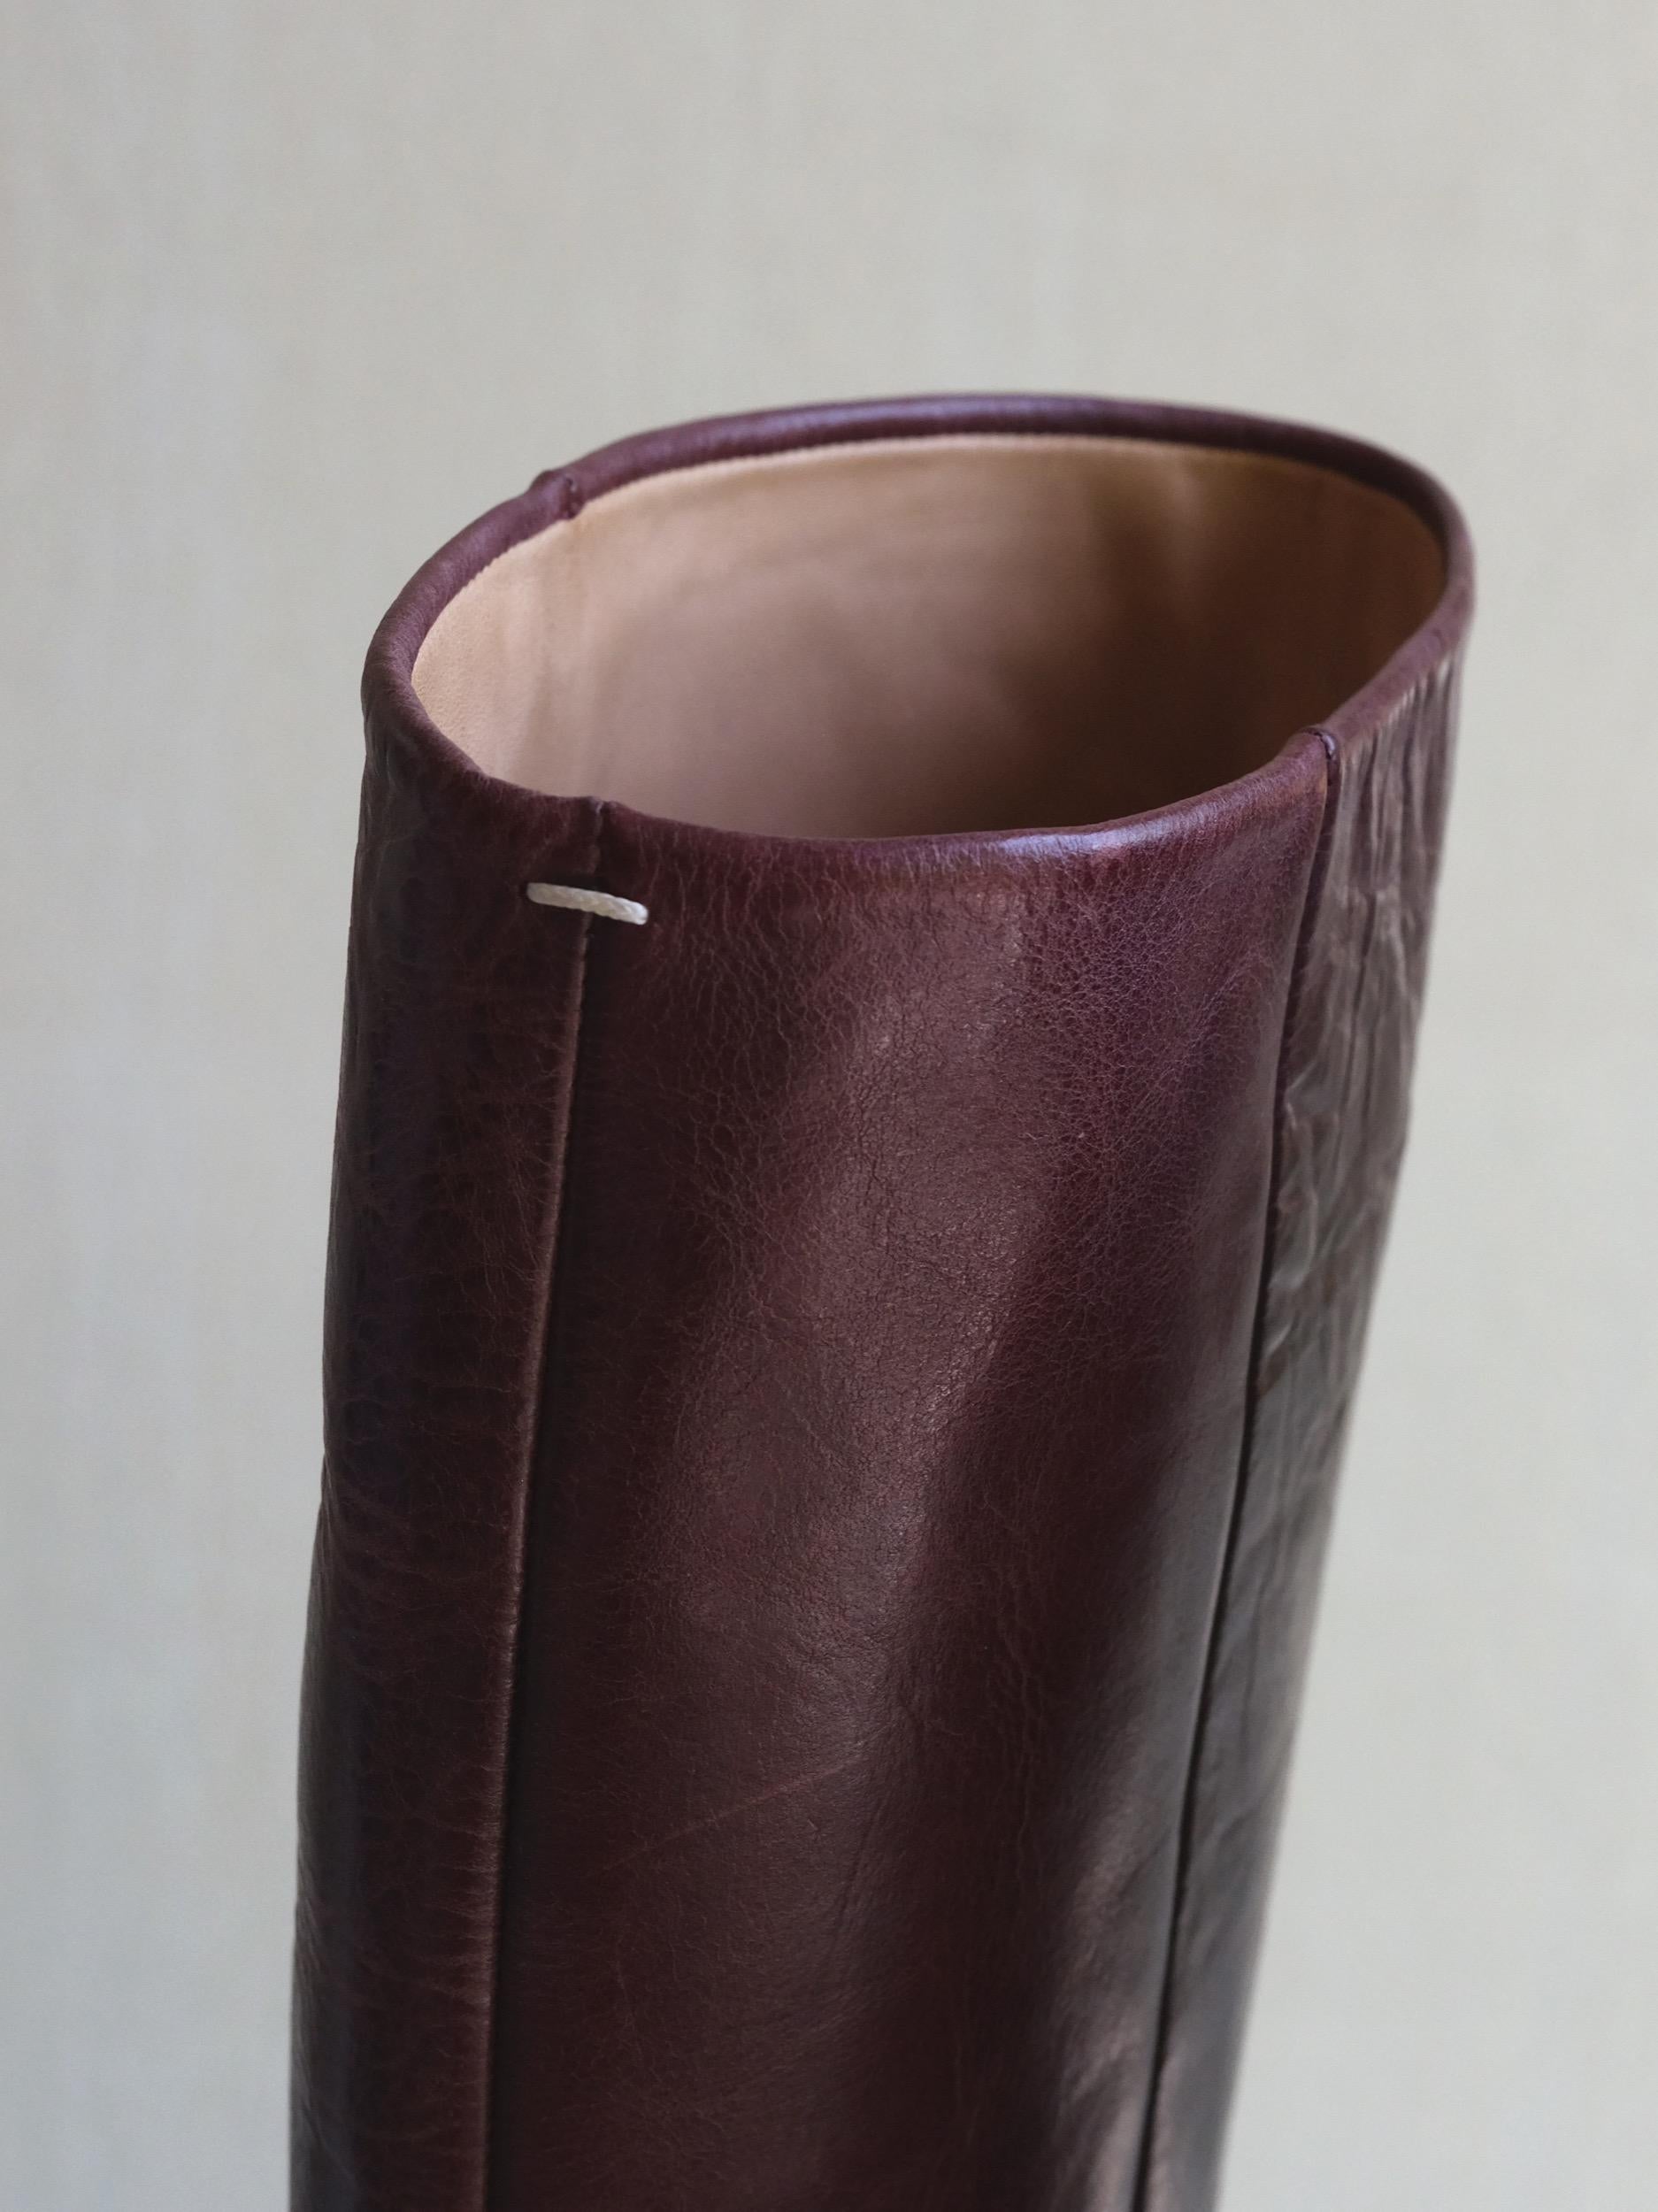 Margiela Knee-high Riding Boots in Wine Red
Replica Line 22
Size 37
Made in Italy
Serial Number 38WW0207 37

Heel Height 3 inches

Tag reads
REPLICA
Reproduction of Garments of Varying Sources and Periods
Style Description................Women